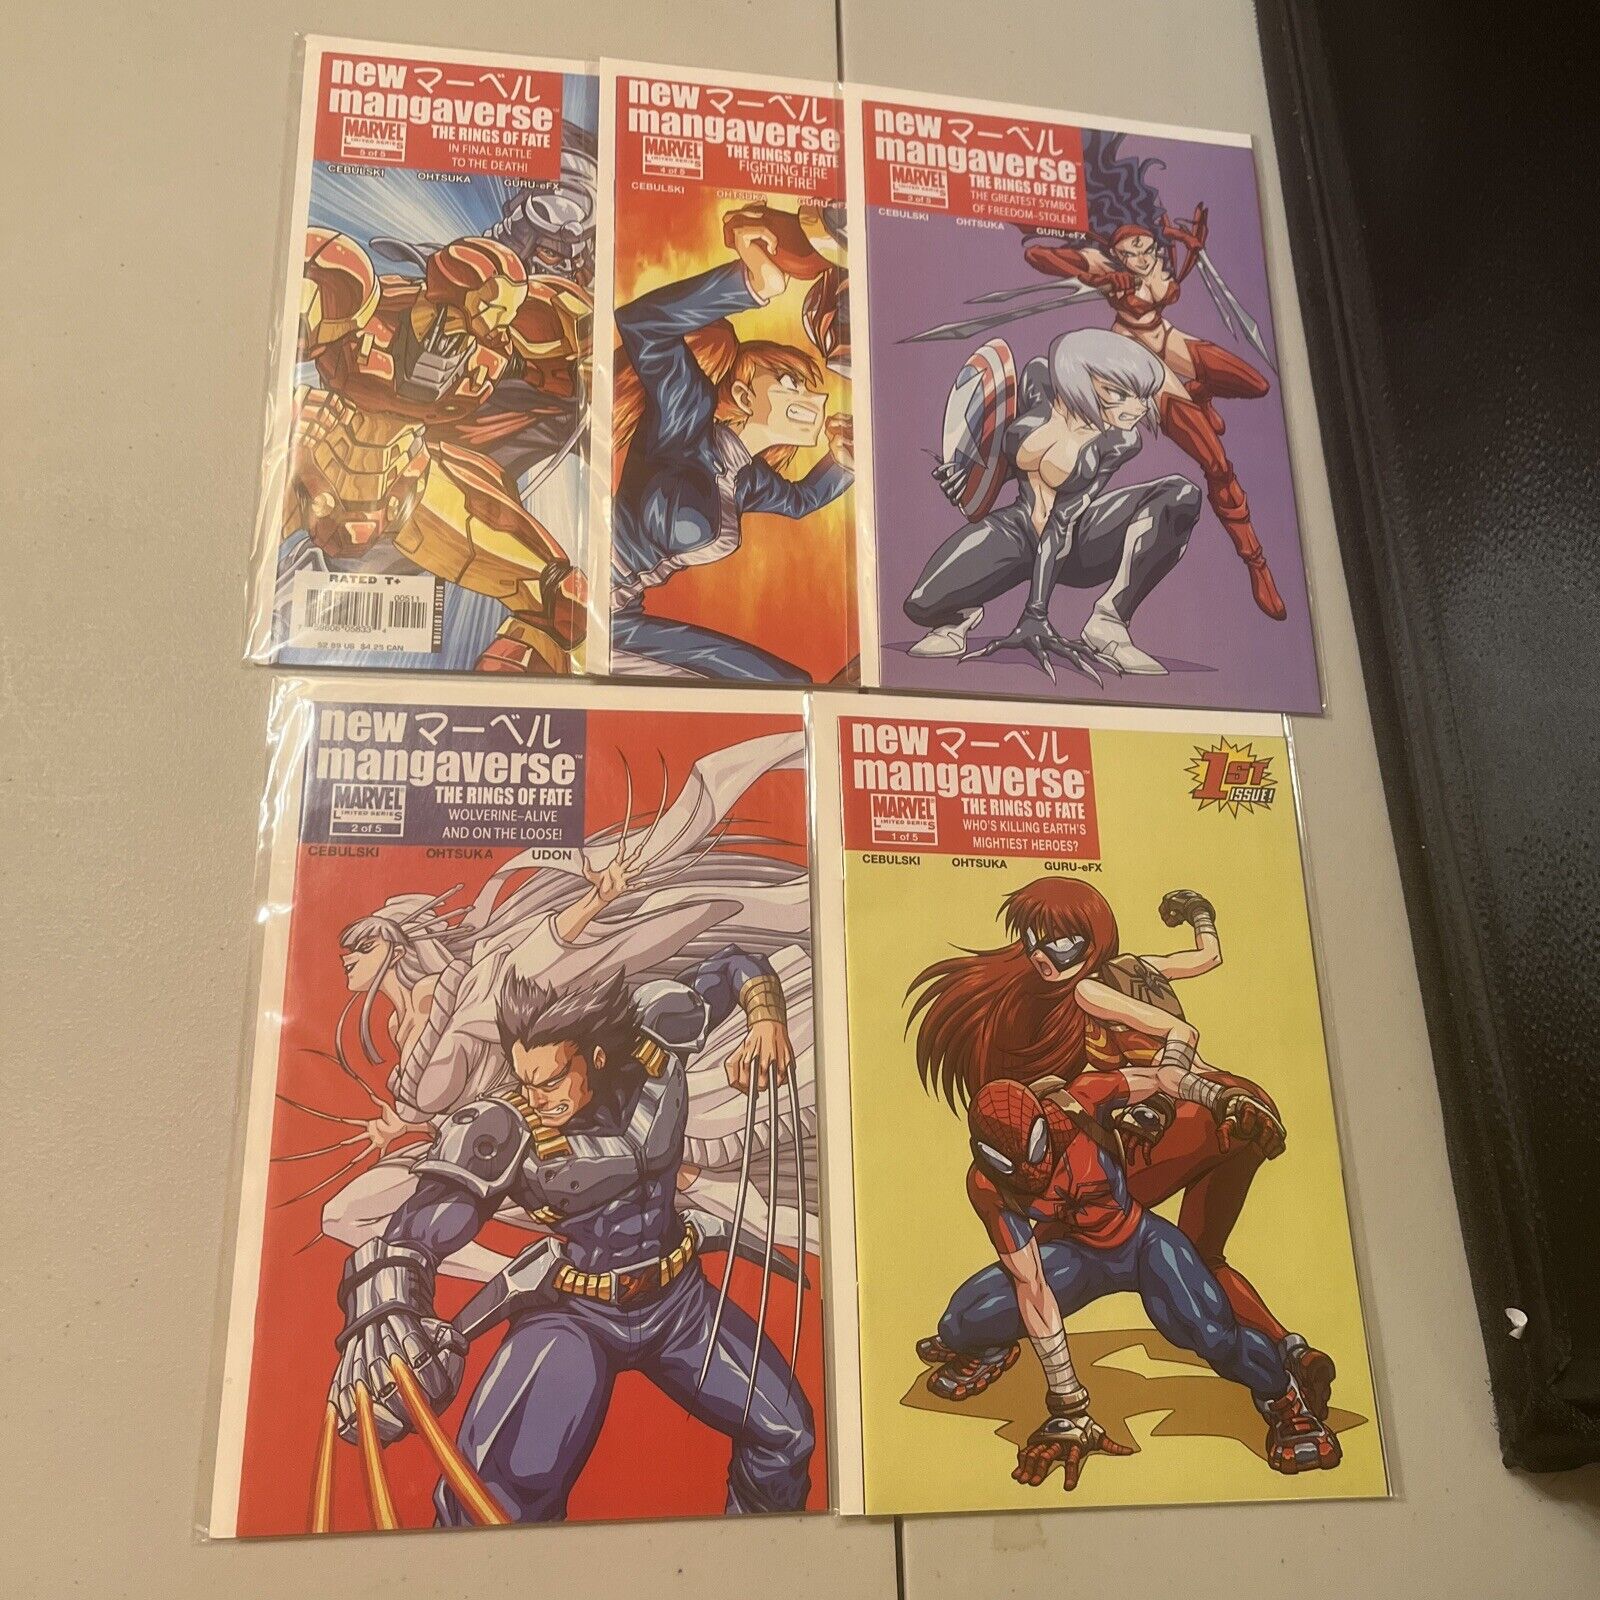 Complete 2006 Series of Marvel New Mangaverse Issues #1 - #5 in VF+/NM cond